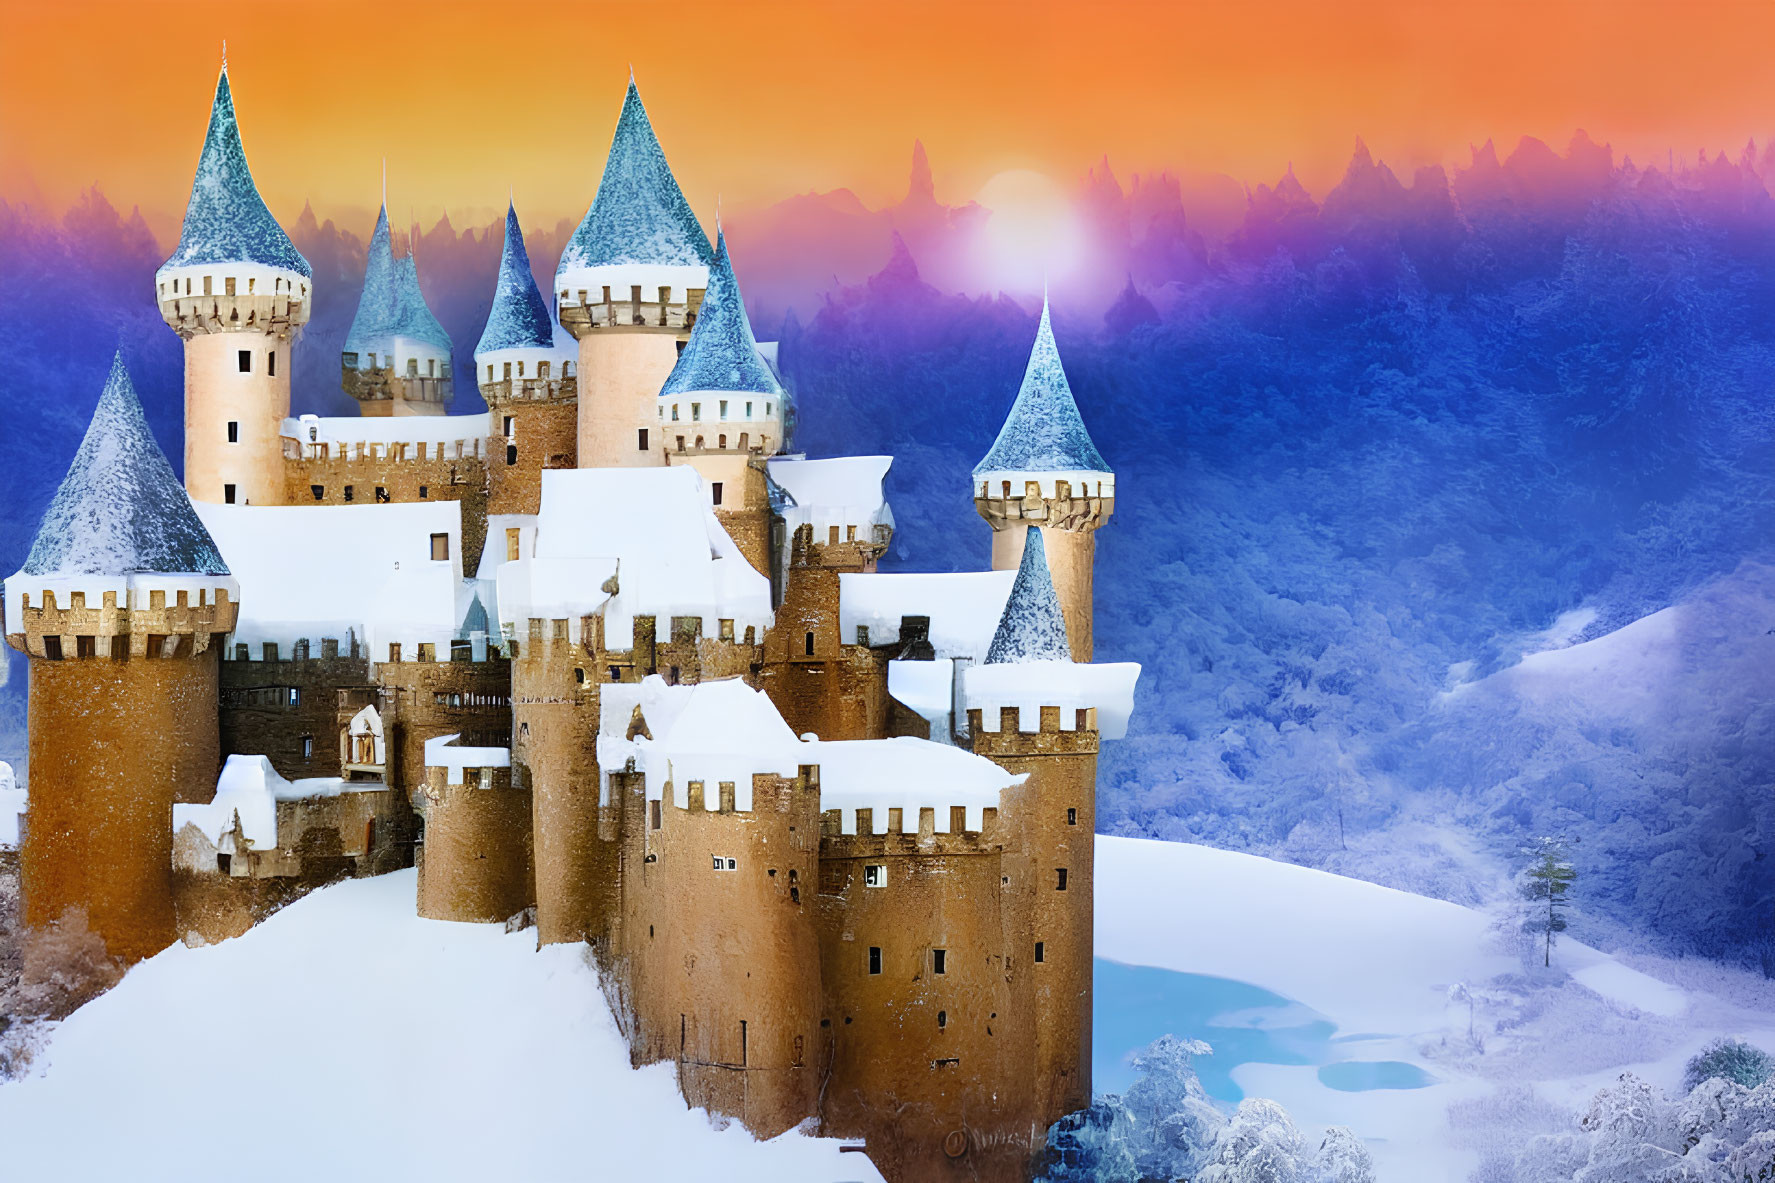 Snow-covered fairytale castle with multiple turrets in twilight sky